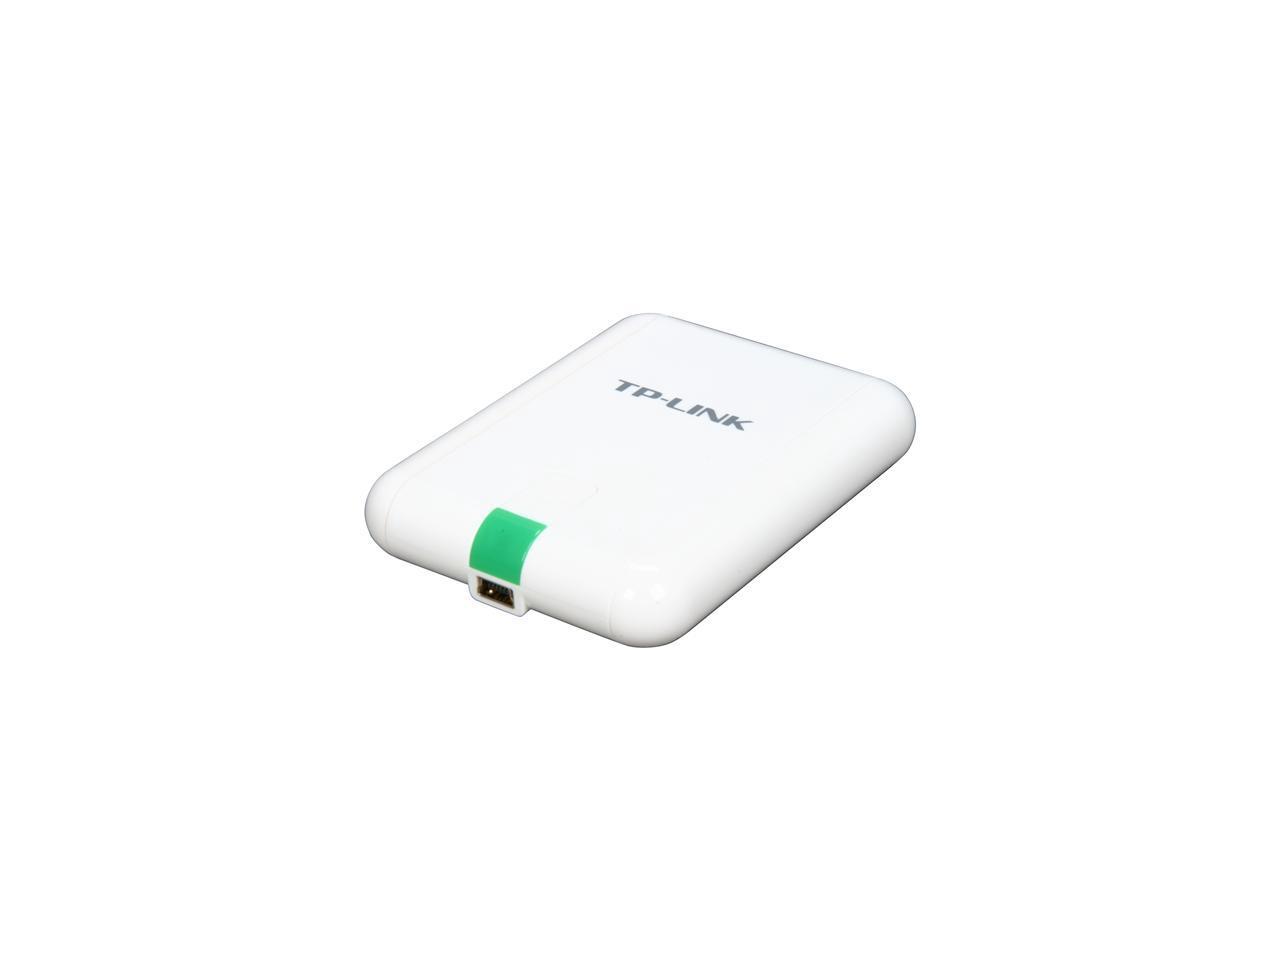 tp link 300 wireless n adapter driver